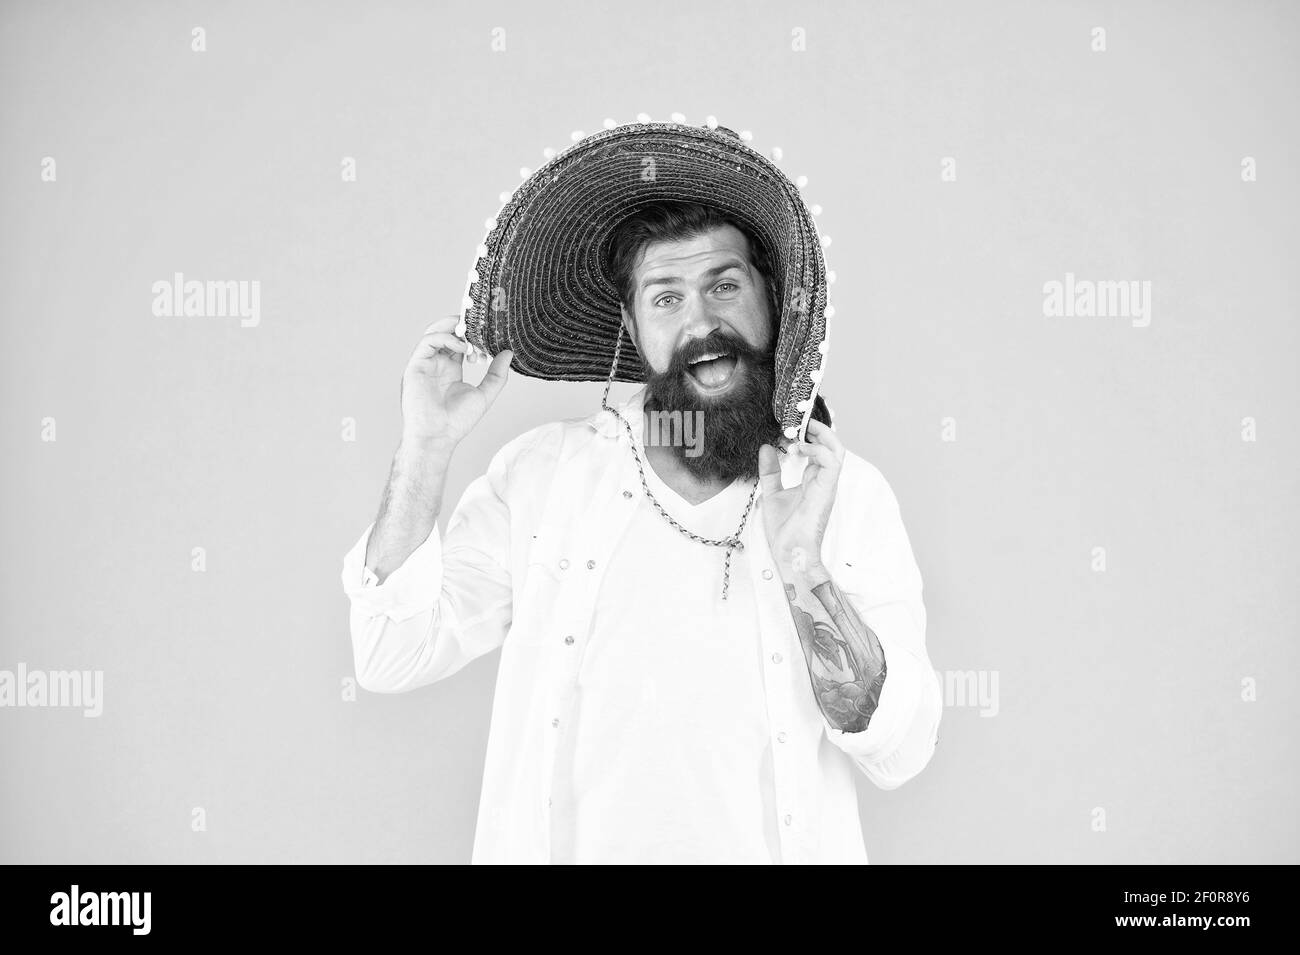 Man+in+poncho Black and White Stock Photos & Images - Alamy